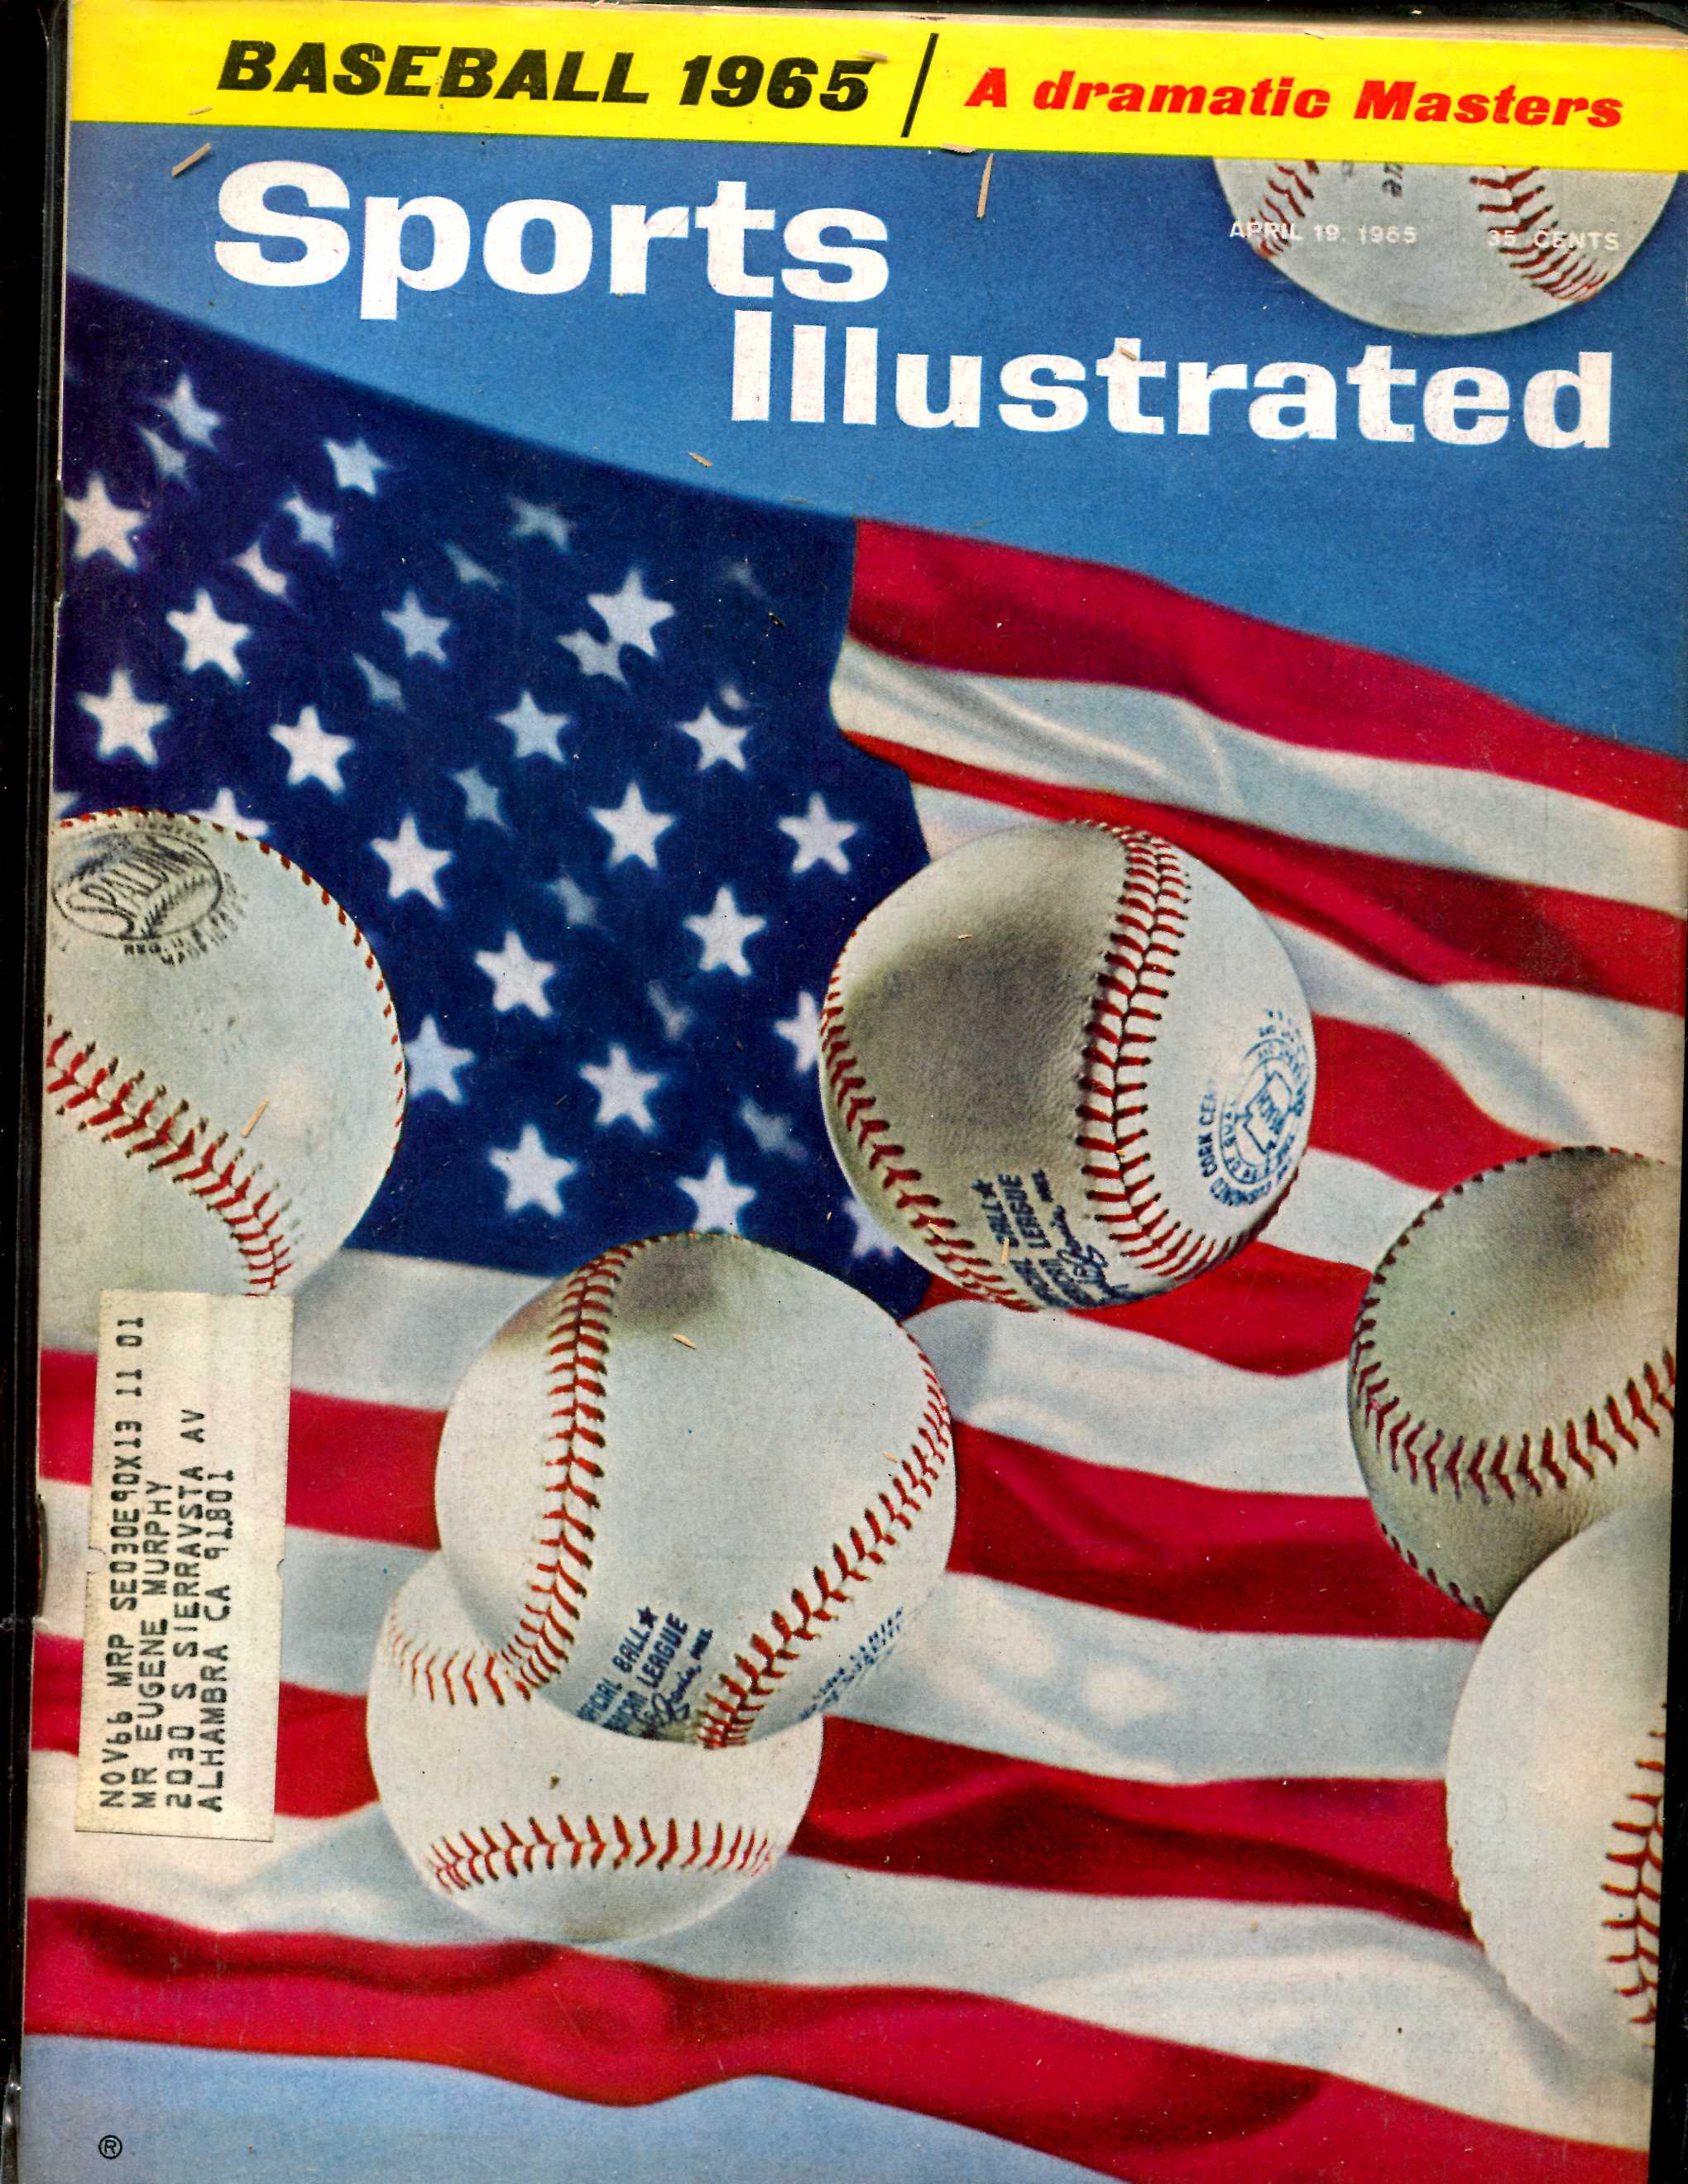 Sports Illustrated (1965/04/19) - 'BASEBALL' issue (also dramatic Masters) Baseball cards value